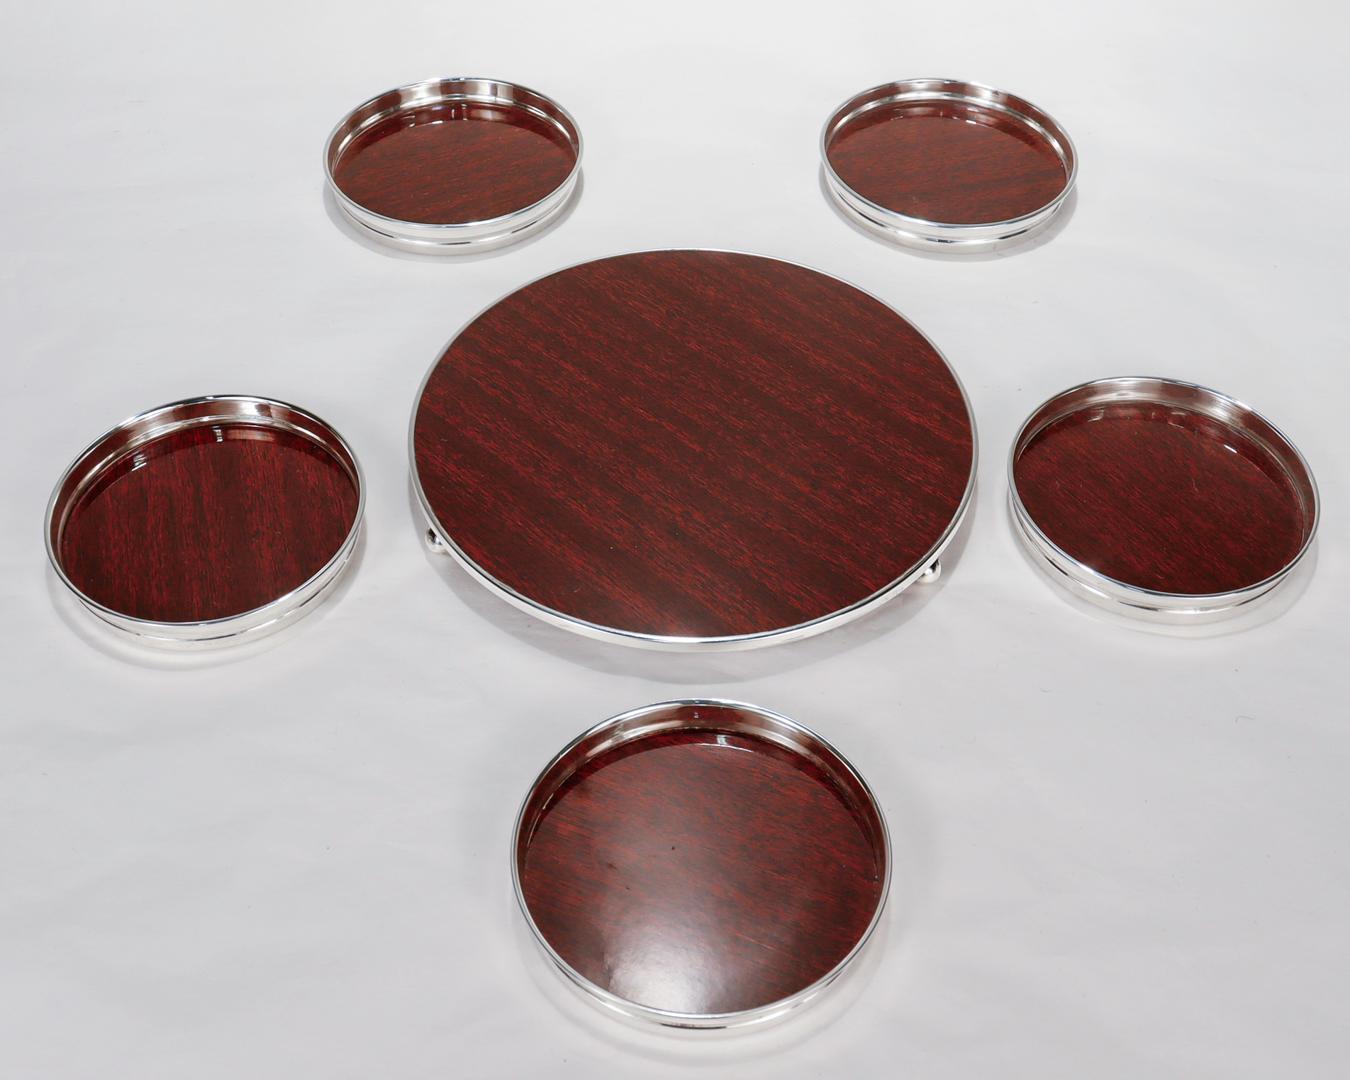 A fine set of coasters for the bar or table.

In sterling silver.

With mahogany toned wood laminate centers for each.

Comprising 1 bottle coasters and 5 individual coasters.

Perfect for your favorite cocktail or wine evening!

Date:
Mid-20th